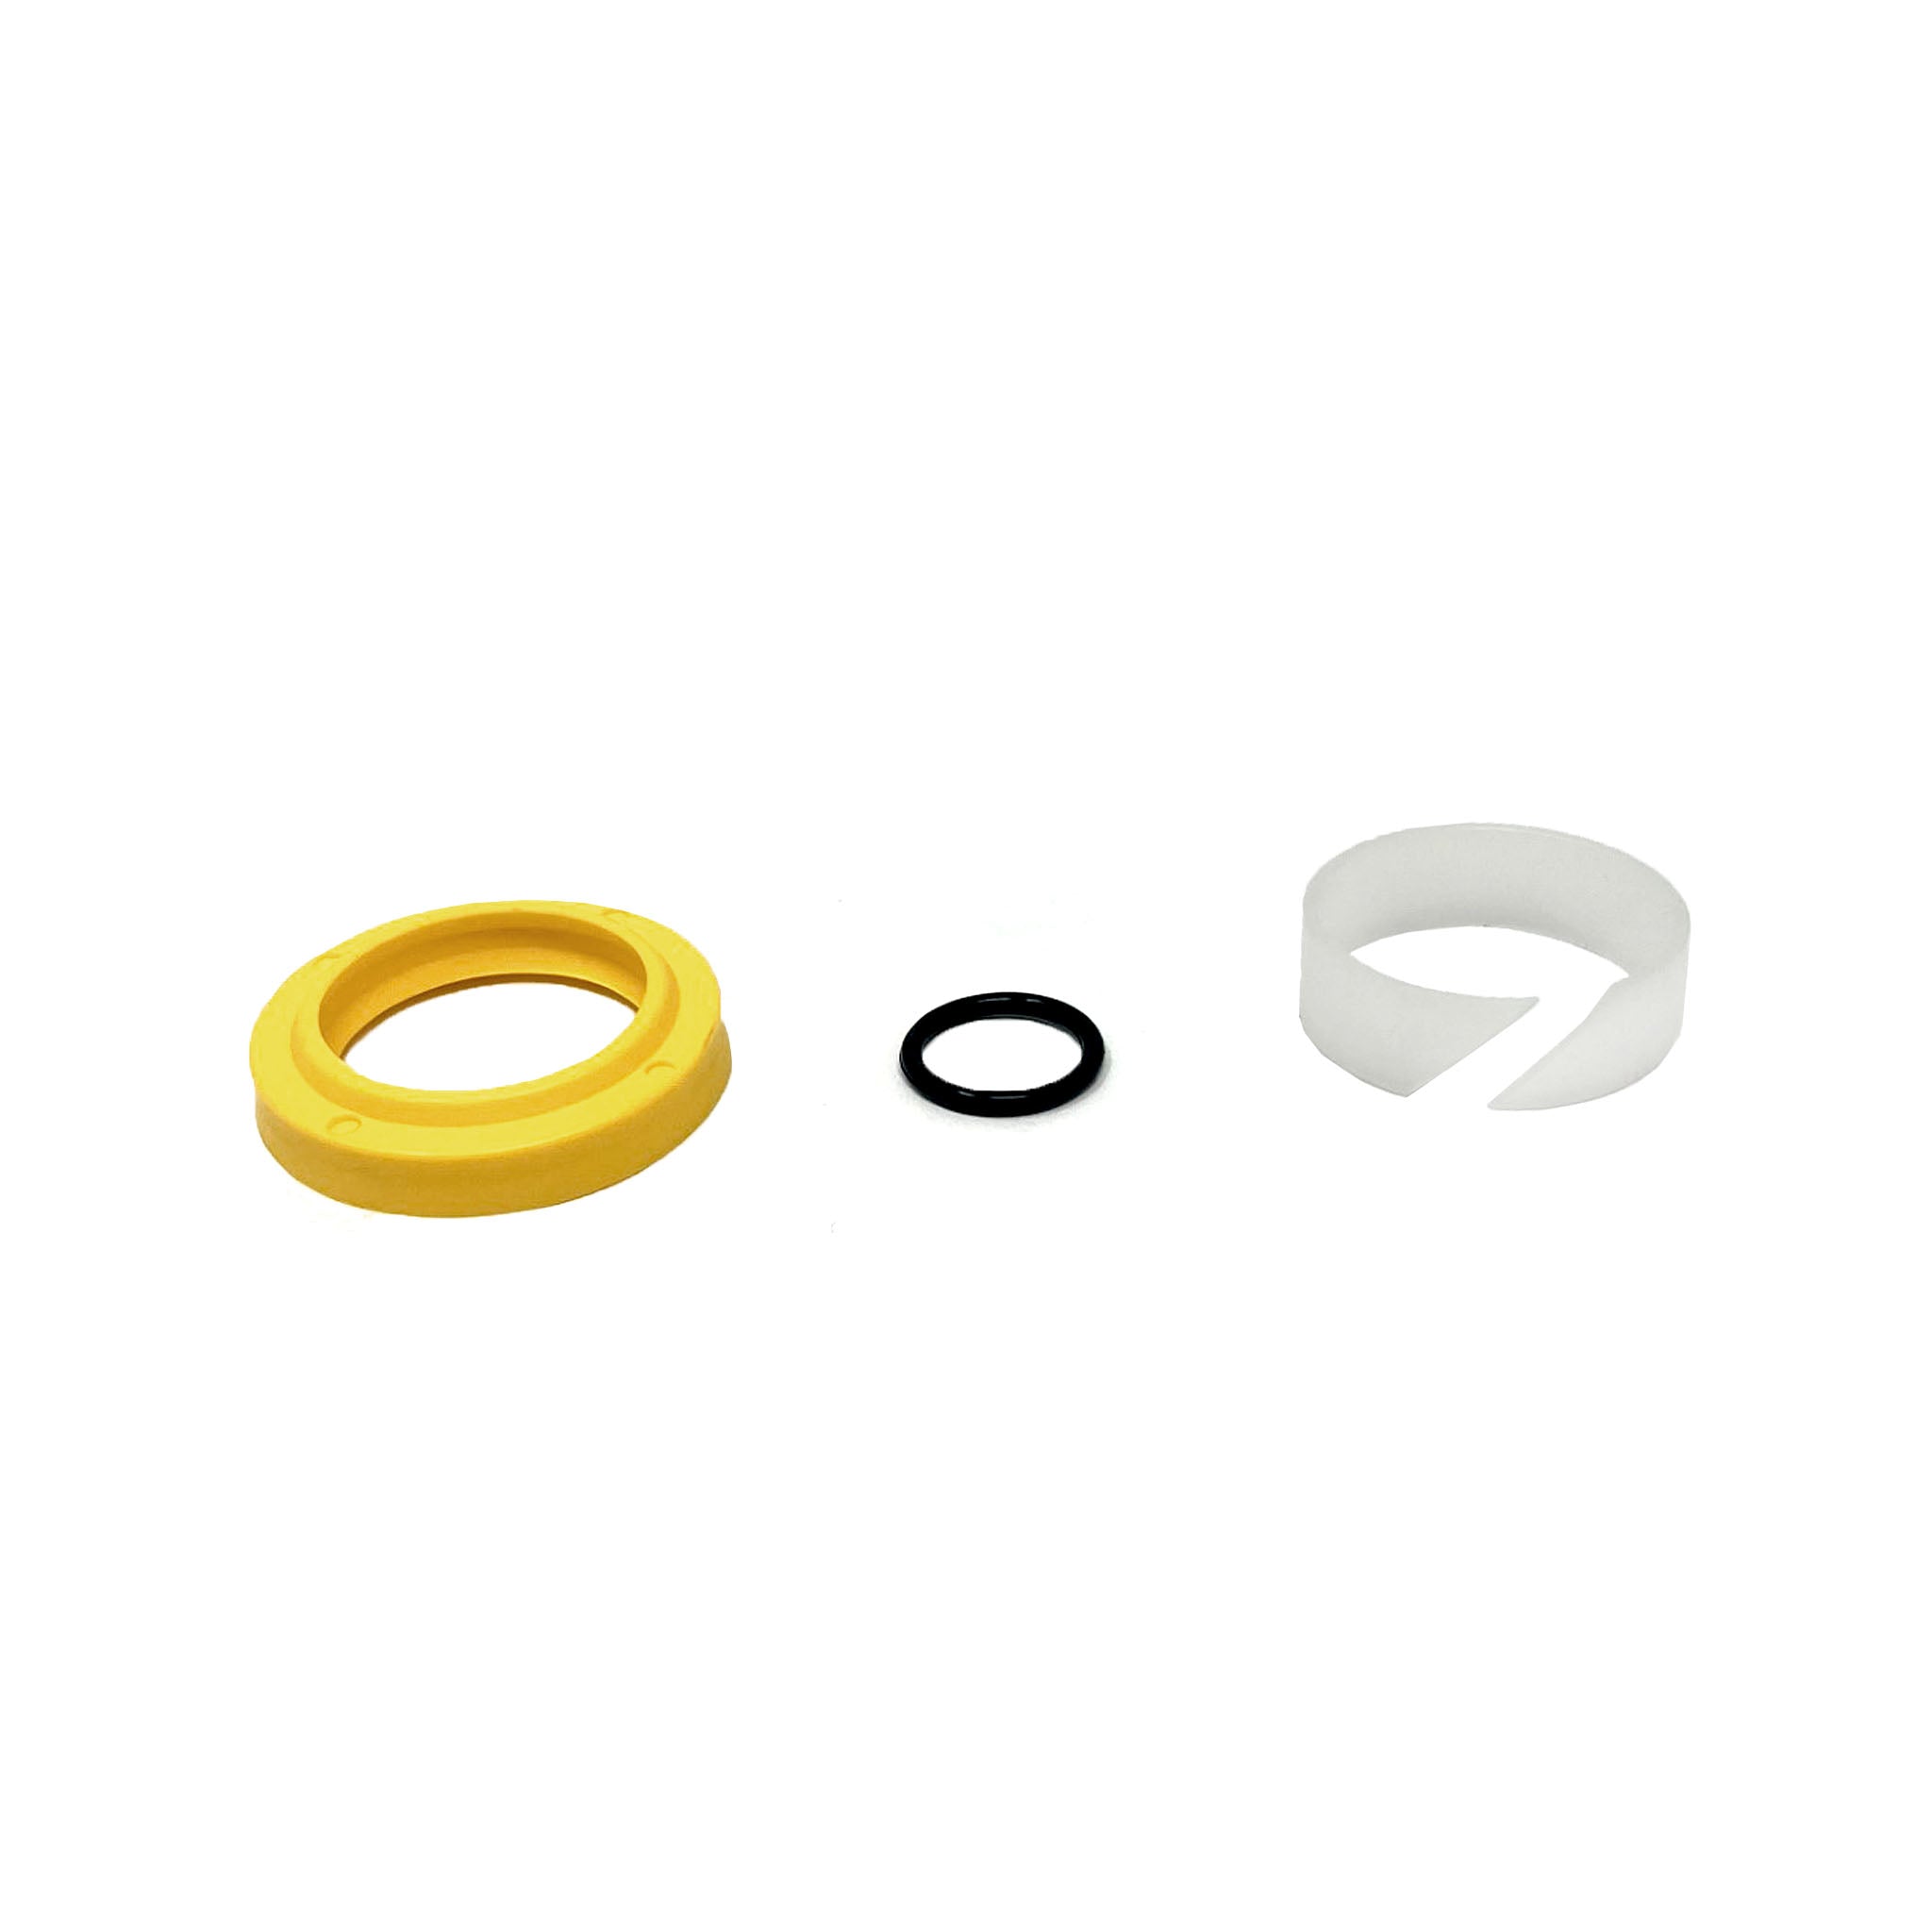 Table Top Cylinder Seal Kit with yellow seal for Coats 5030, 5060 or 5070